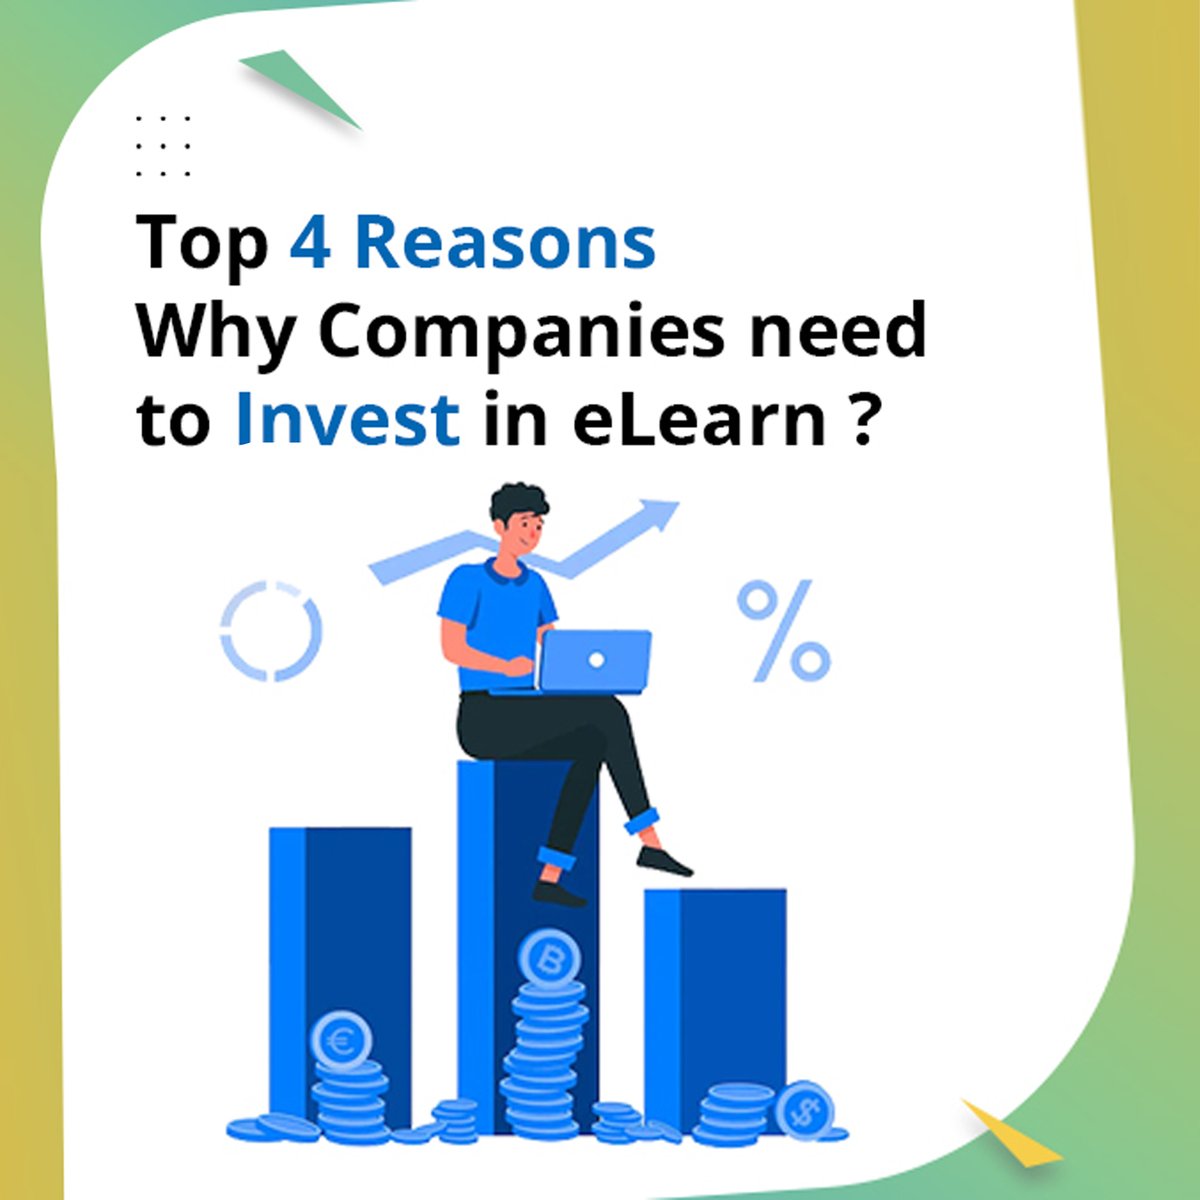 Discover the secret behind Fortune 500 companies' productivity boost!

Top 4 Reasons Why Companies need to Invest in eLearn>>bit.ly/3LwK5Hx

#EfficientTraining  #WorkplaceProductivity #CorporateTraining  #businessowners #business #retailindustry